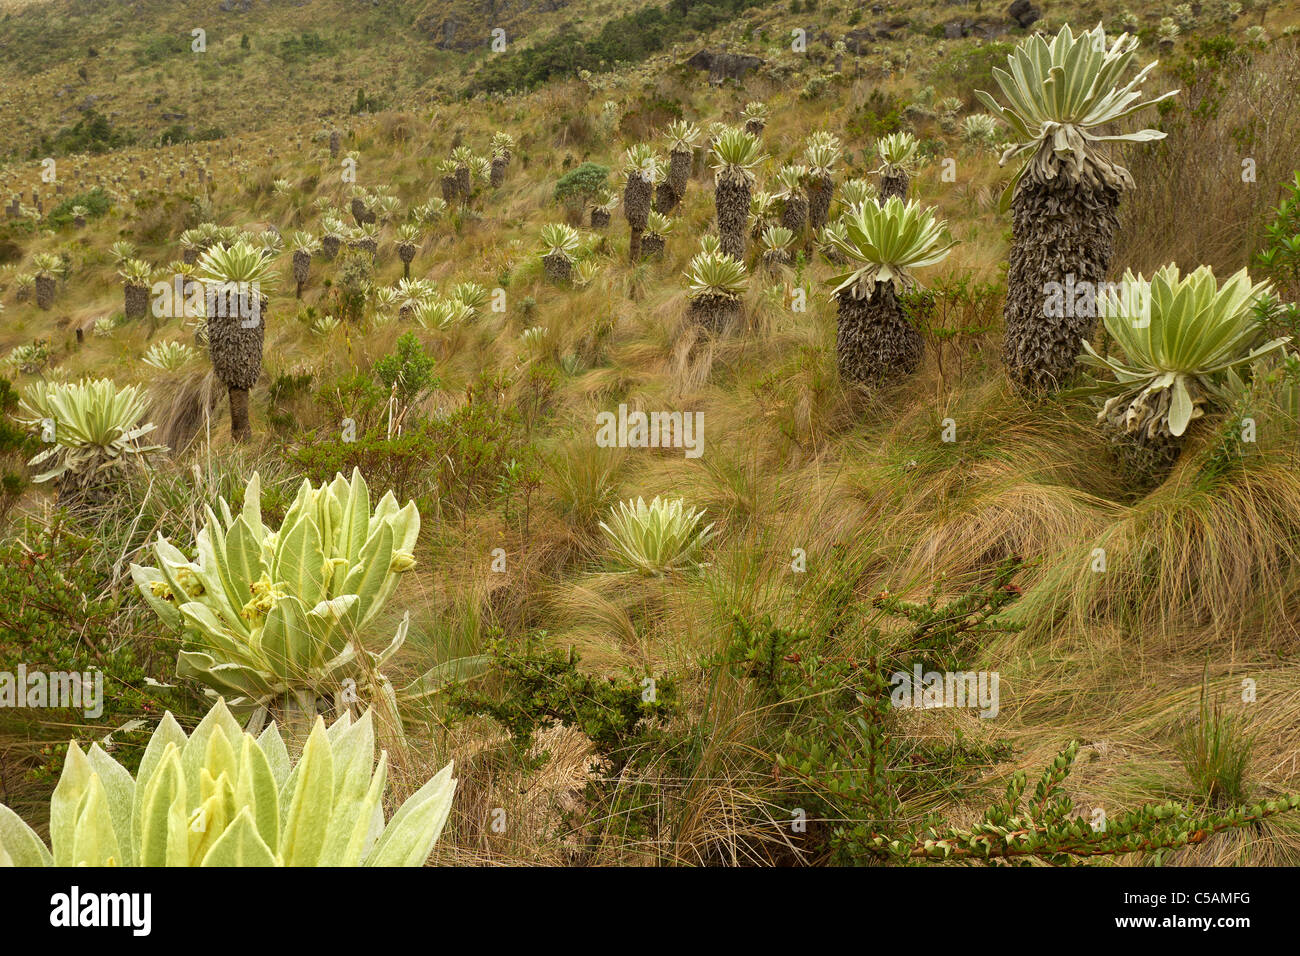 Espeletia Is An Endemic Plant From Colombia Ecuador And Venezuela Live At High Altitude In The Paramo Ecosystems Stock Photo